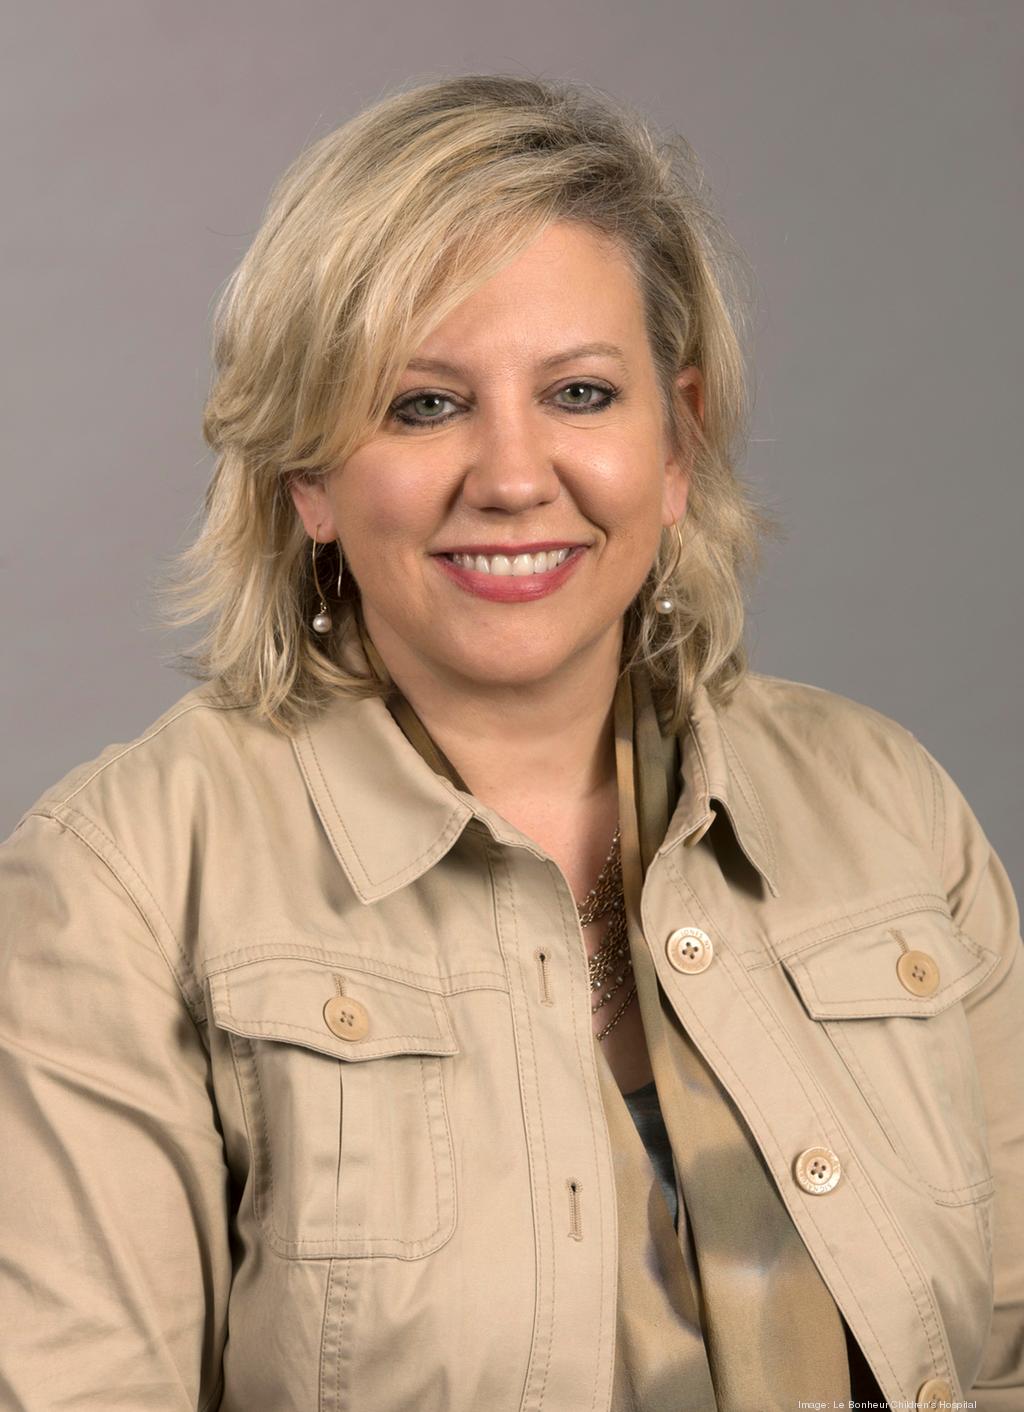 Women Who Lead in Hospitality, Camille Wellington, National sales manager,  Renasant Convention Center, managed by Memphis Management Group - Memphis  Business Journal